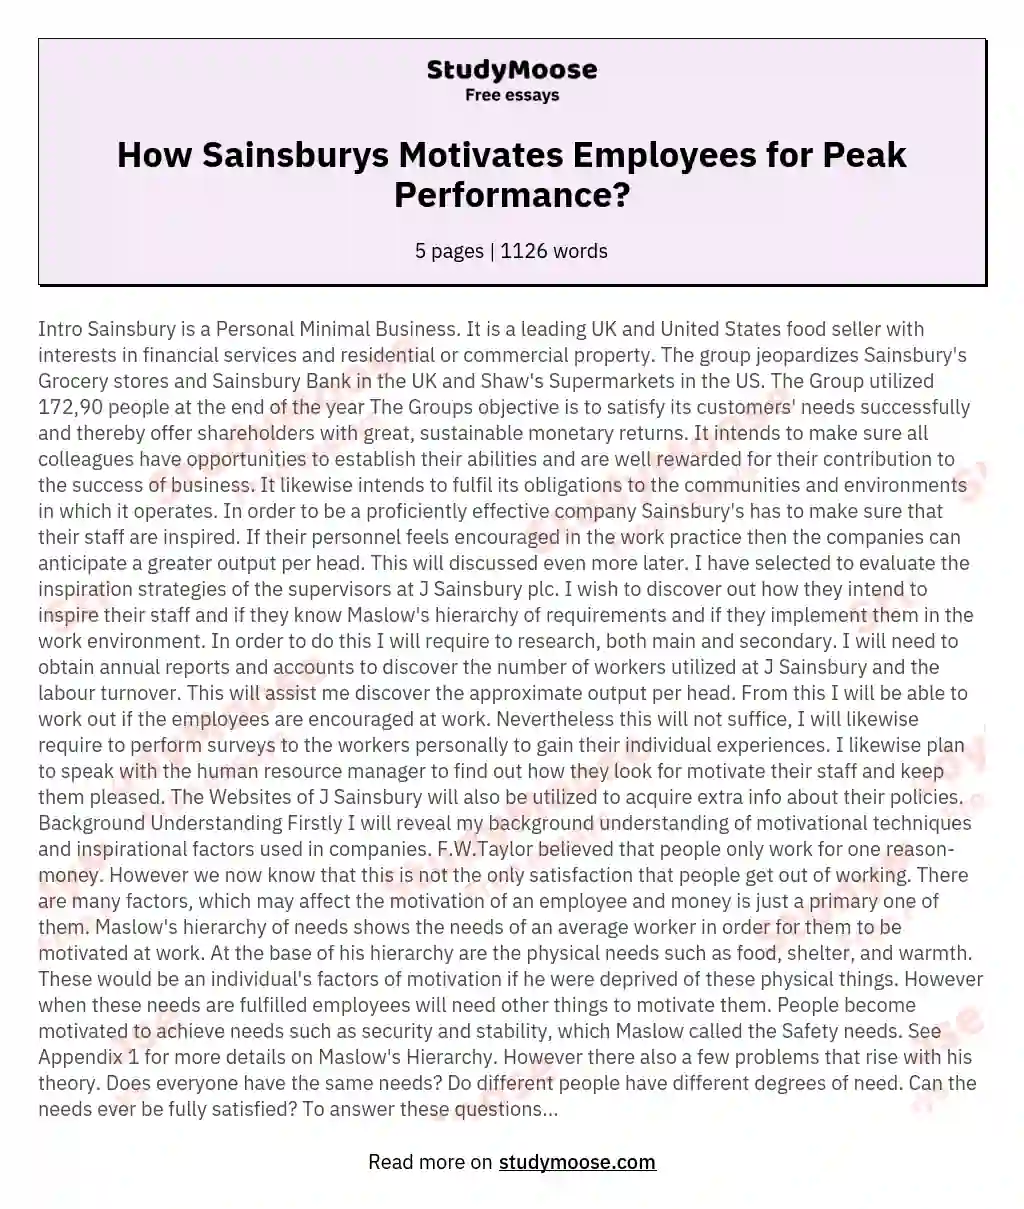 What motivational strategies does Sainsbury's use with its employees to maximise their overall performance?